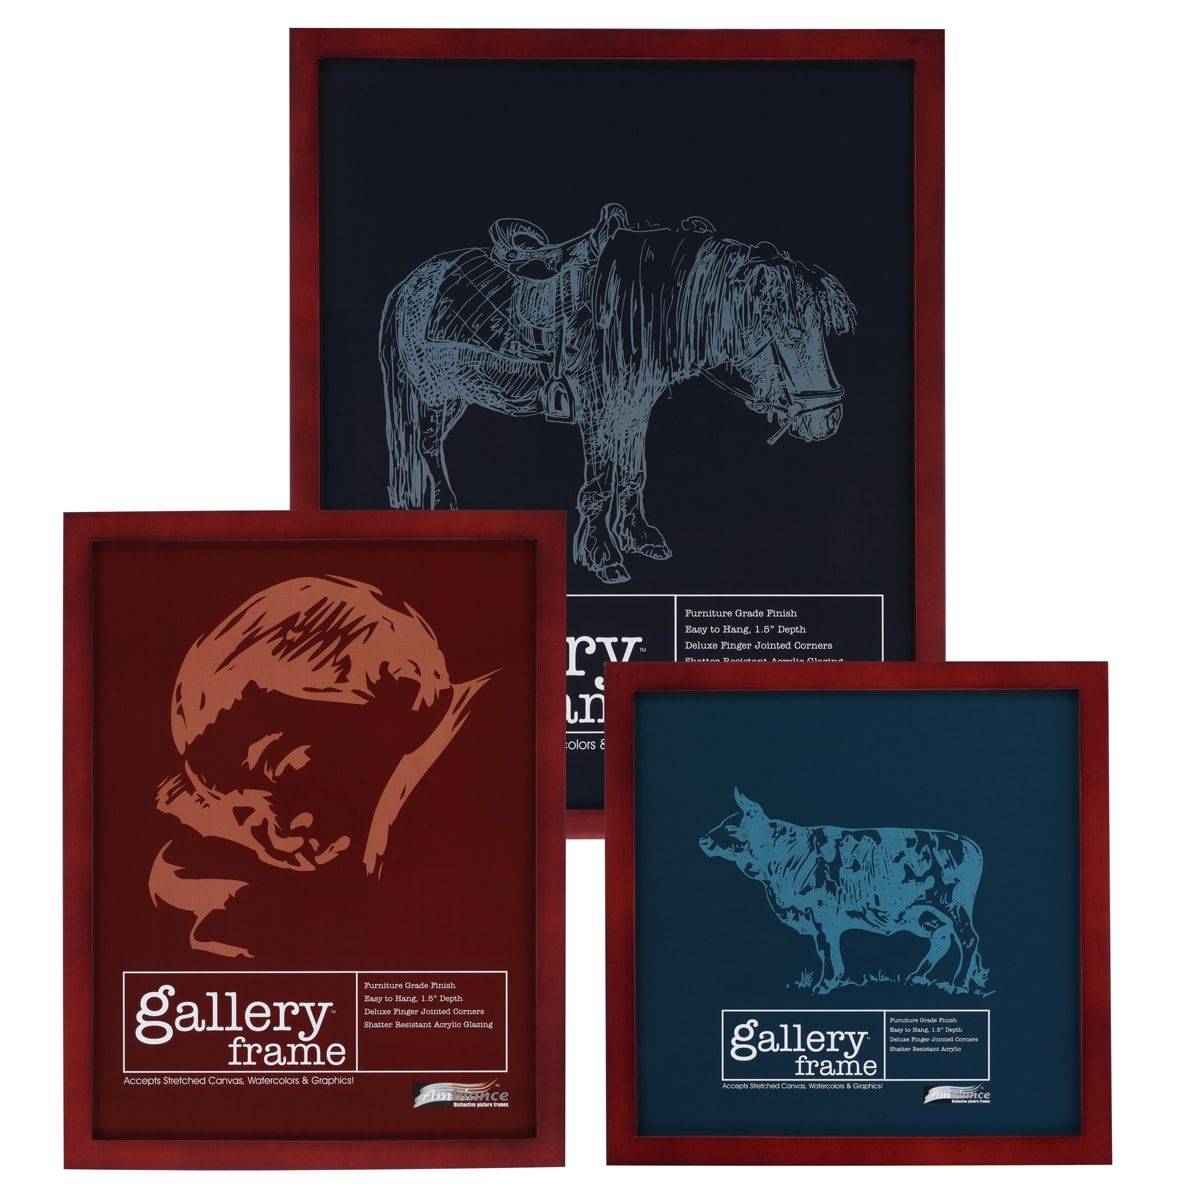 Ambiance Gallery Wood Frame Variety Of Sizes